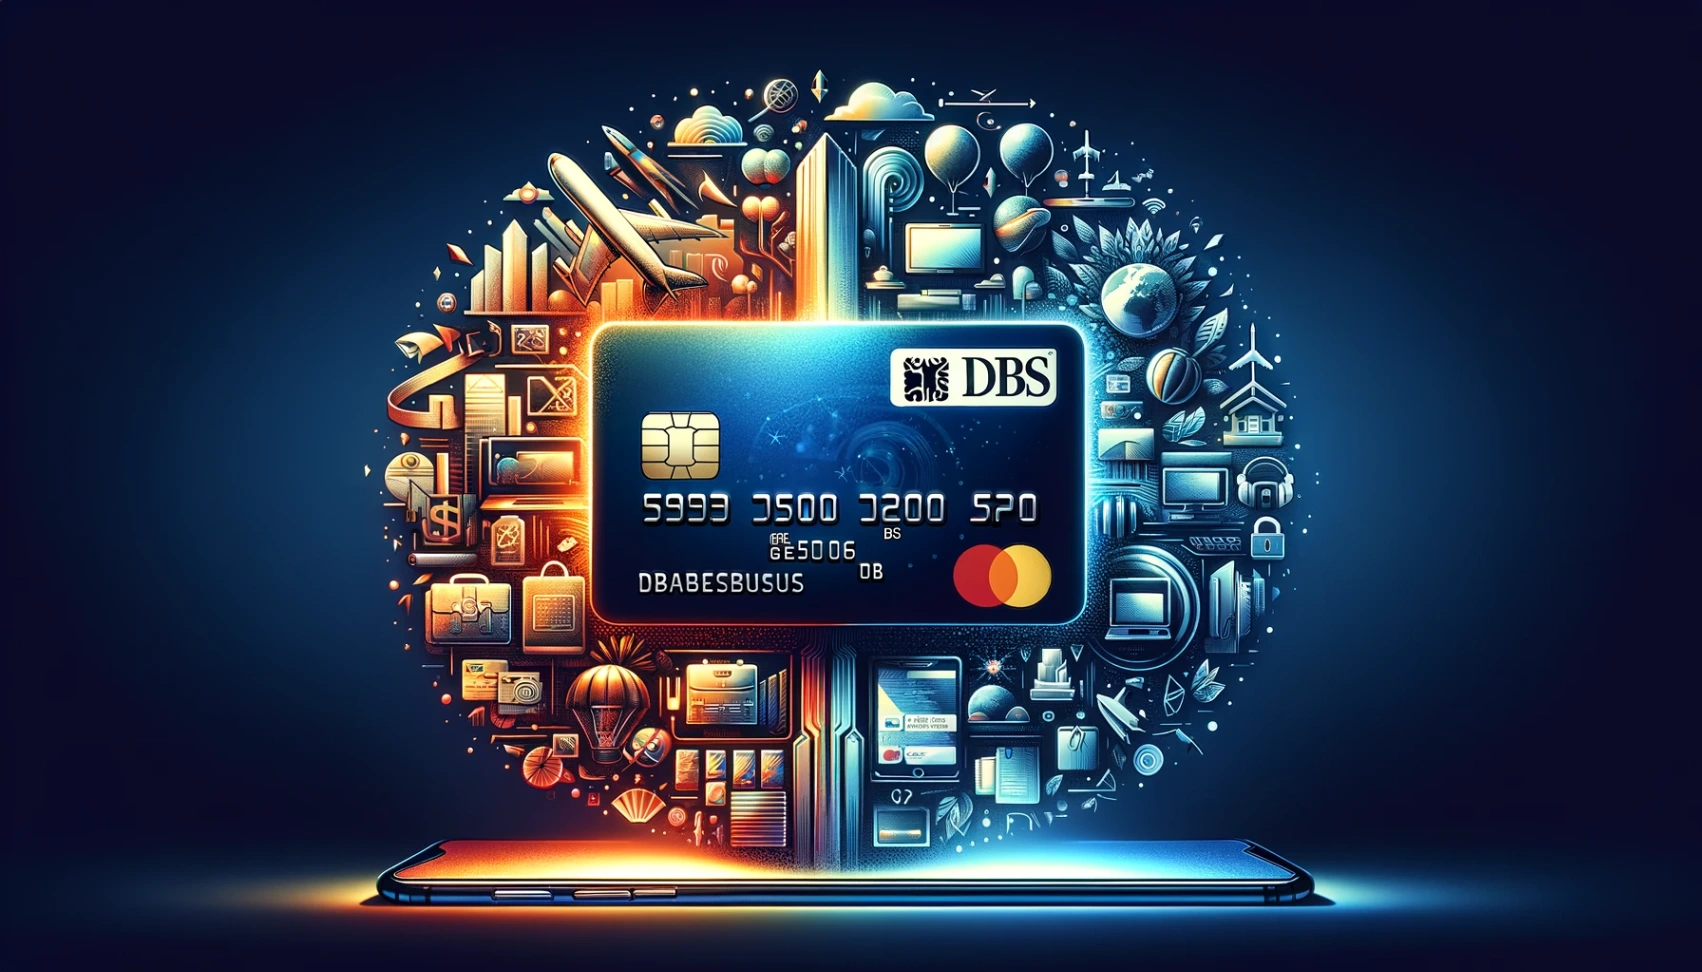 How to Apply DBS Credit Card: Benefits, Fees, and More 